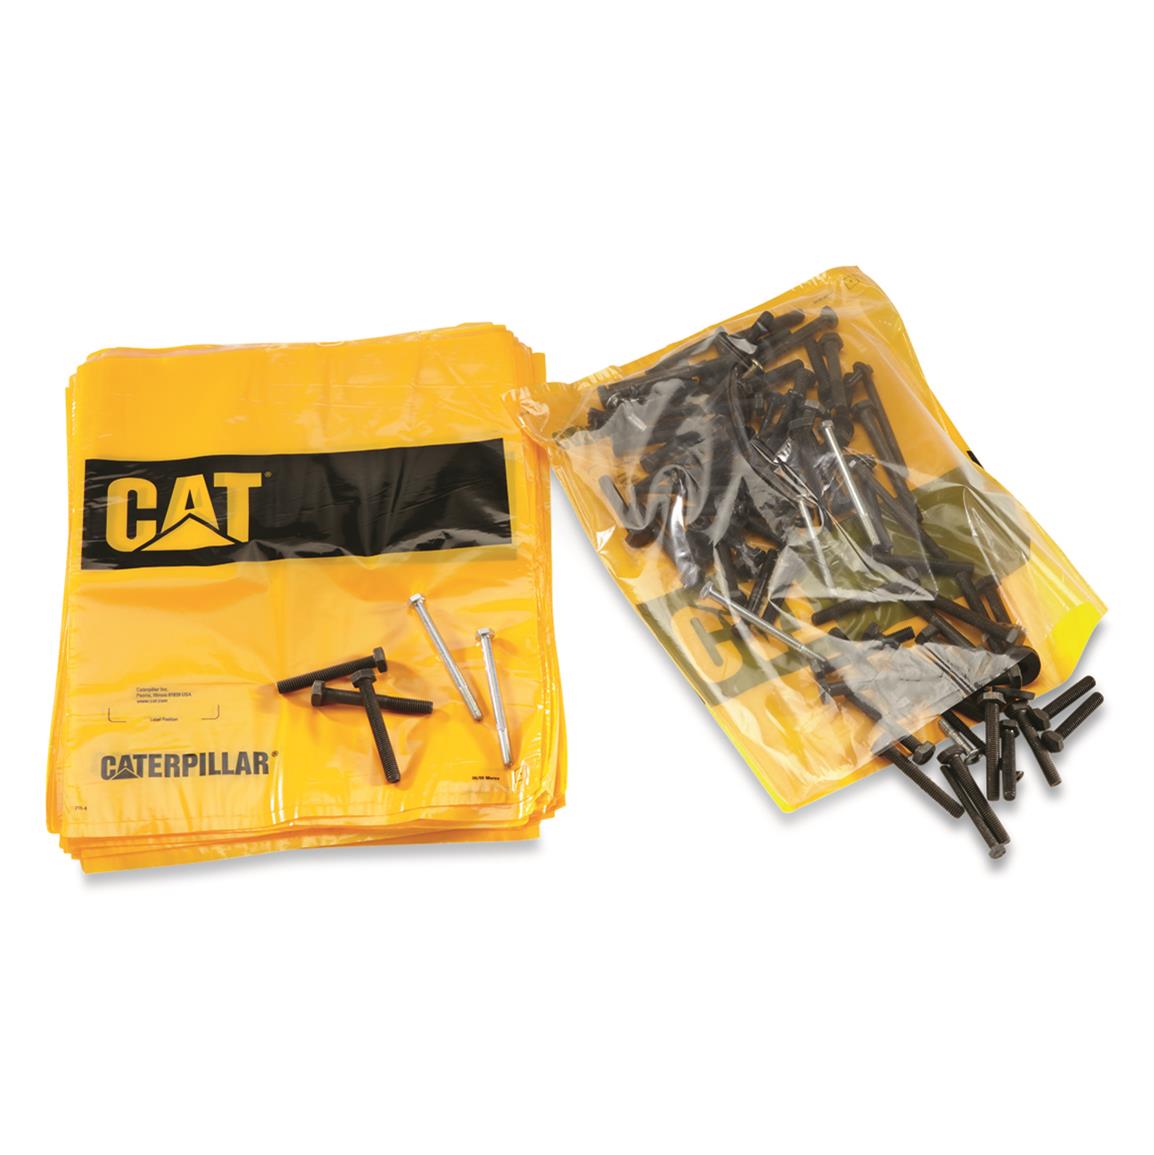 U.S. Forestry Service CAT Parts Bags, 50 Pack, New